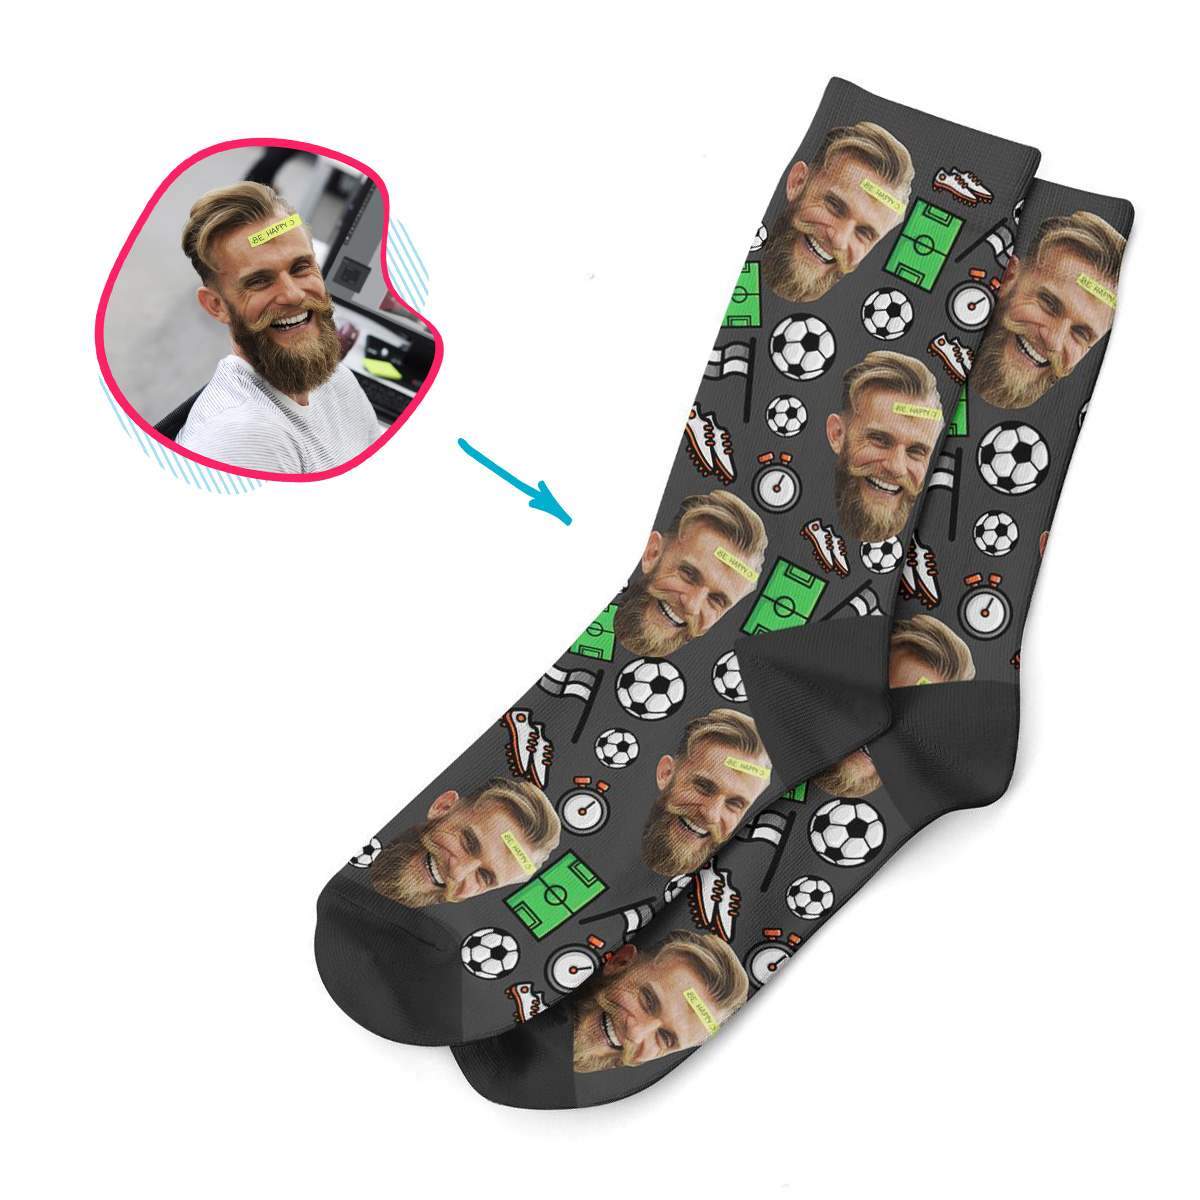 dark Football socks personalized with photo of face printed on them